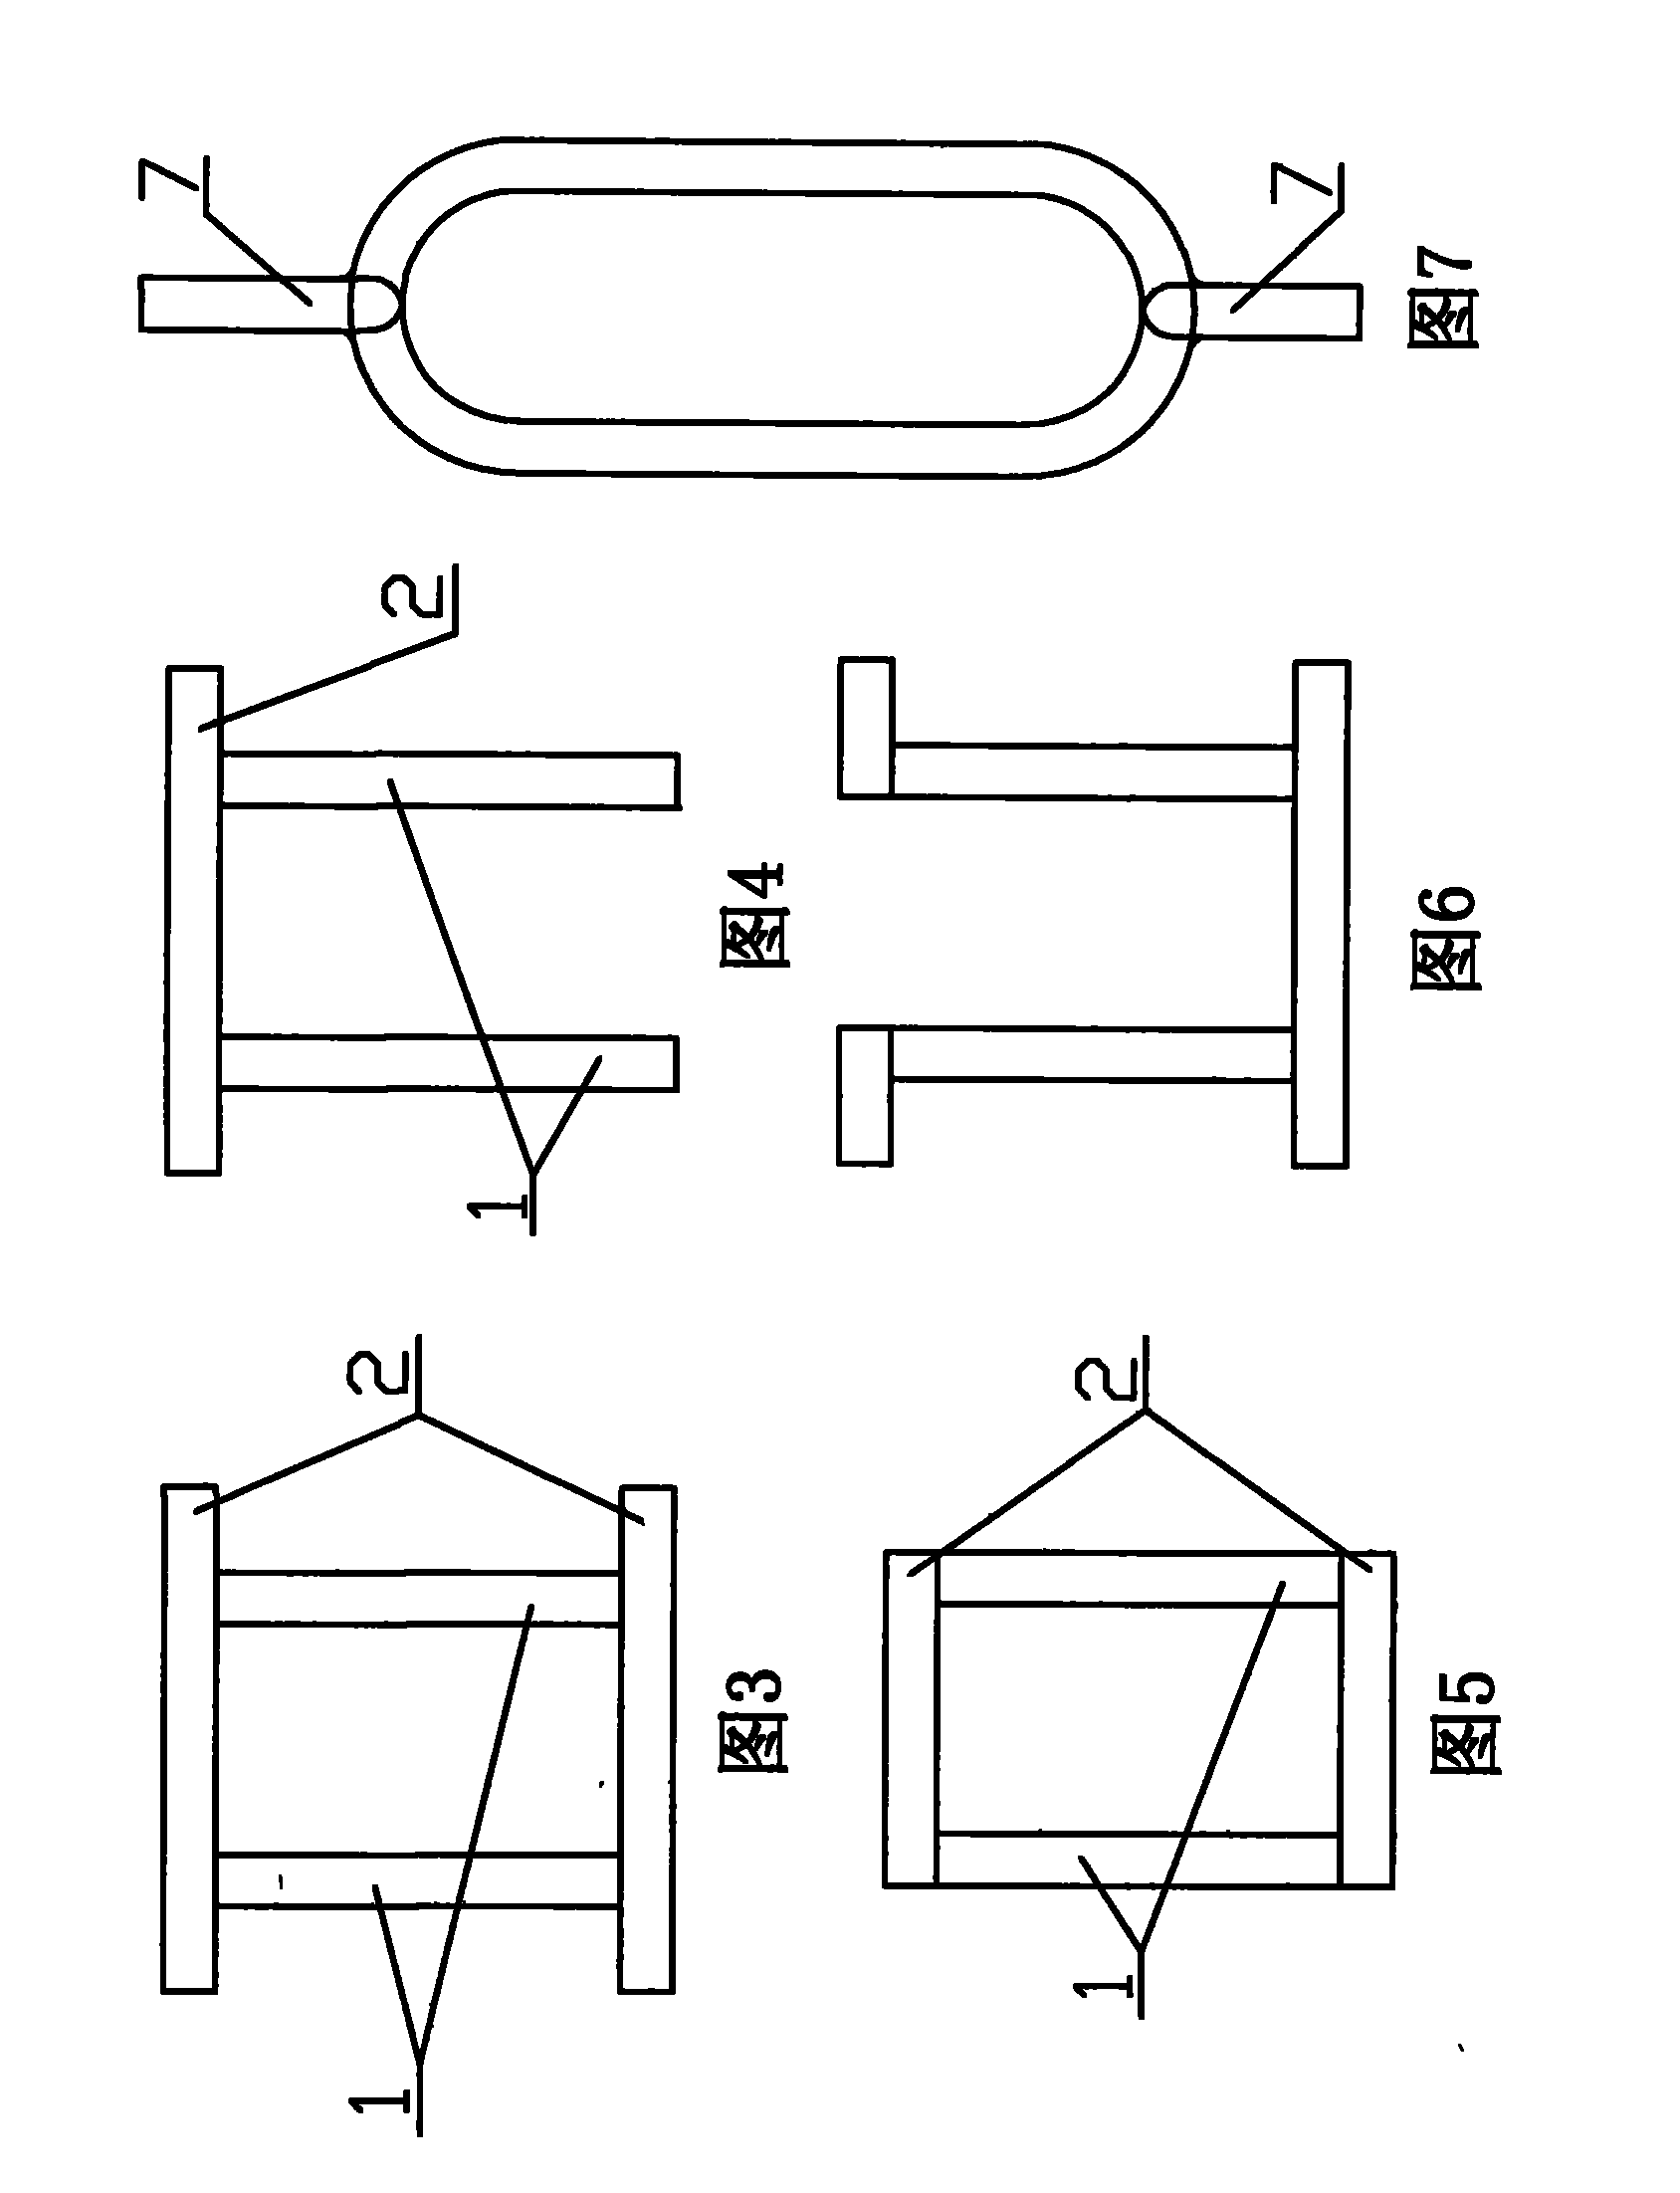 Continuous-work stone cutter rail